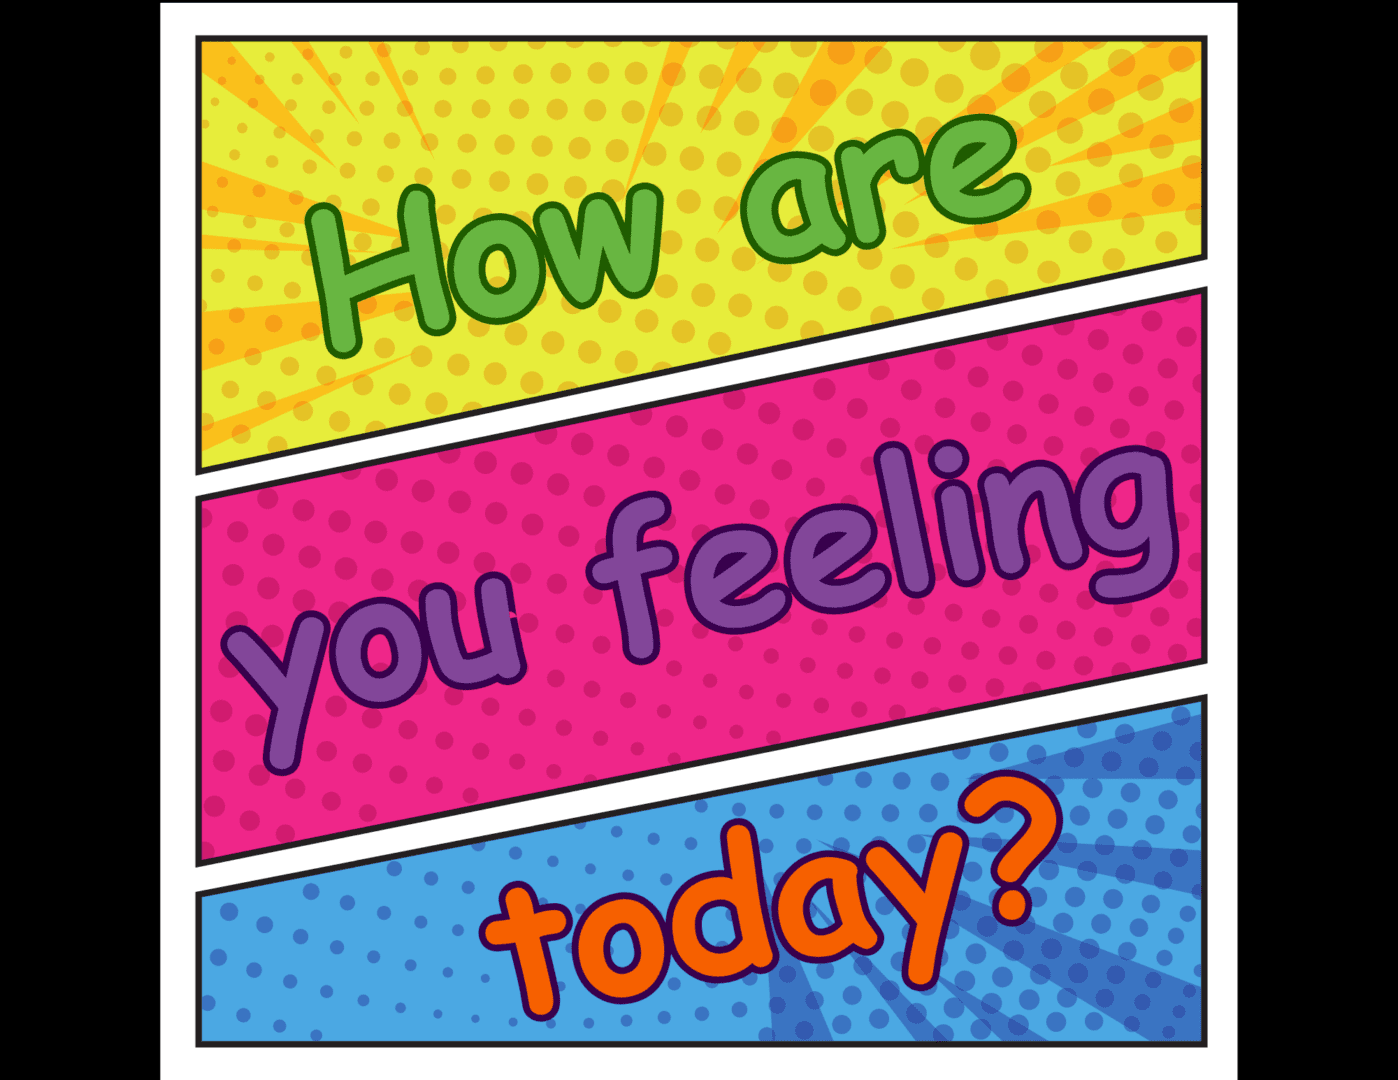 How are you feeling today flyer on the website